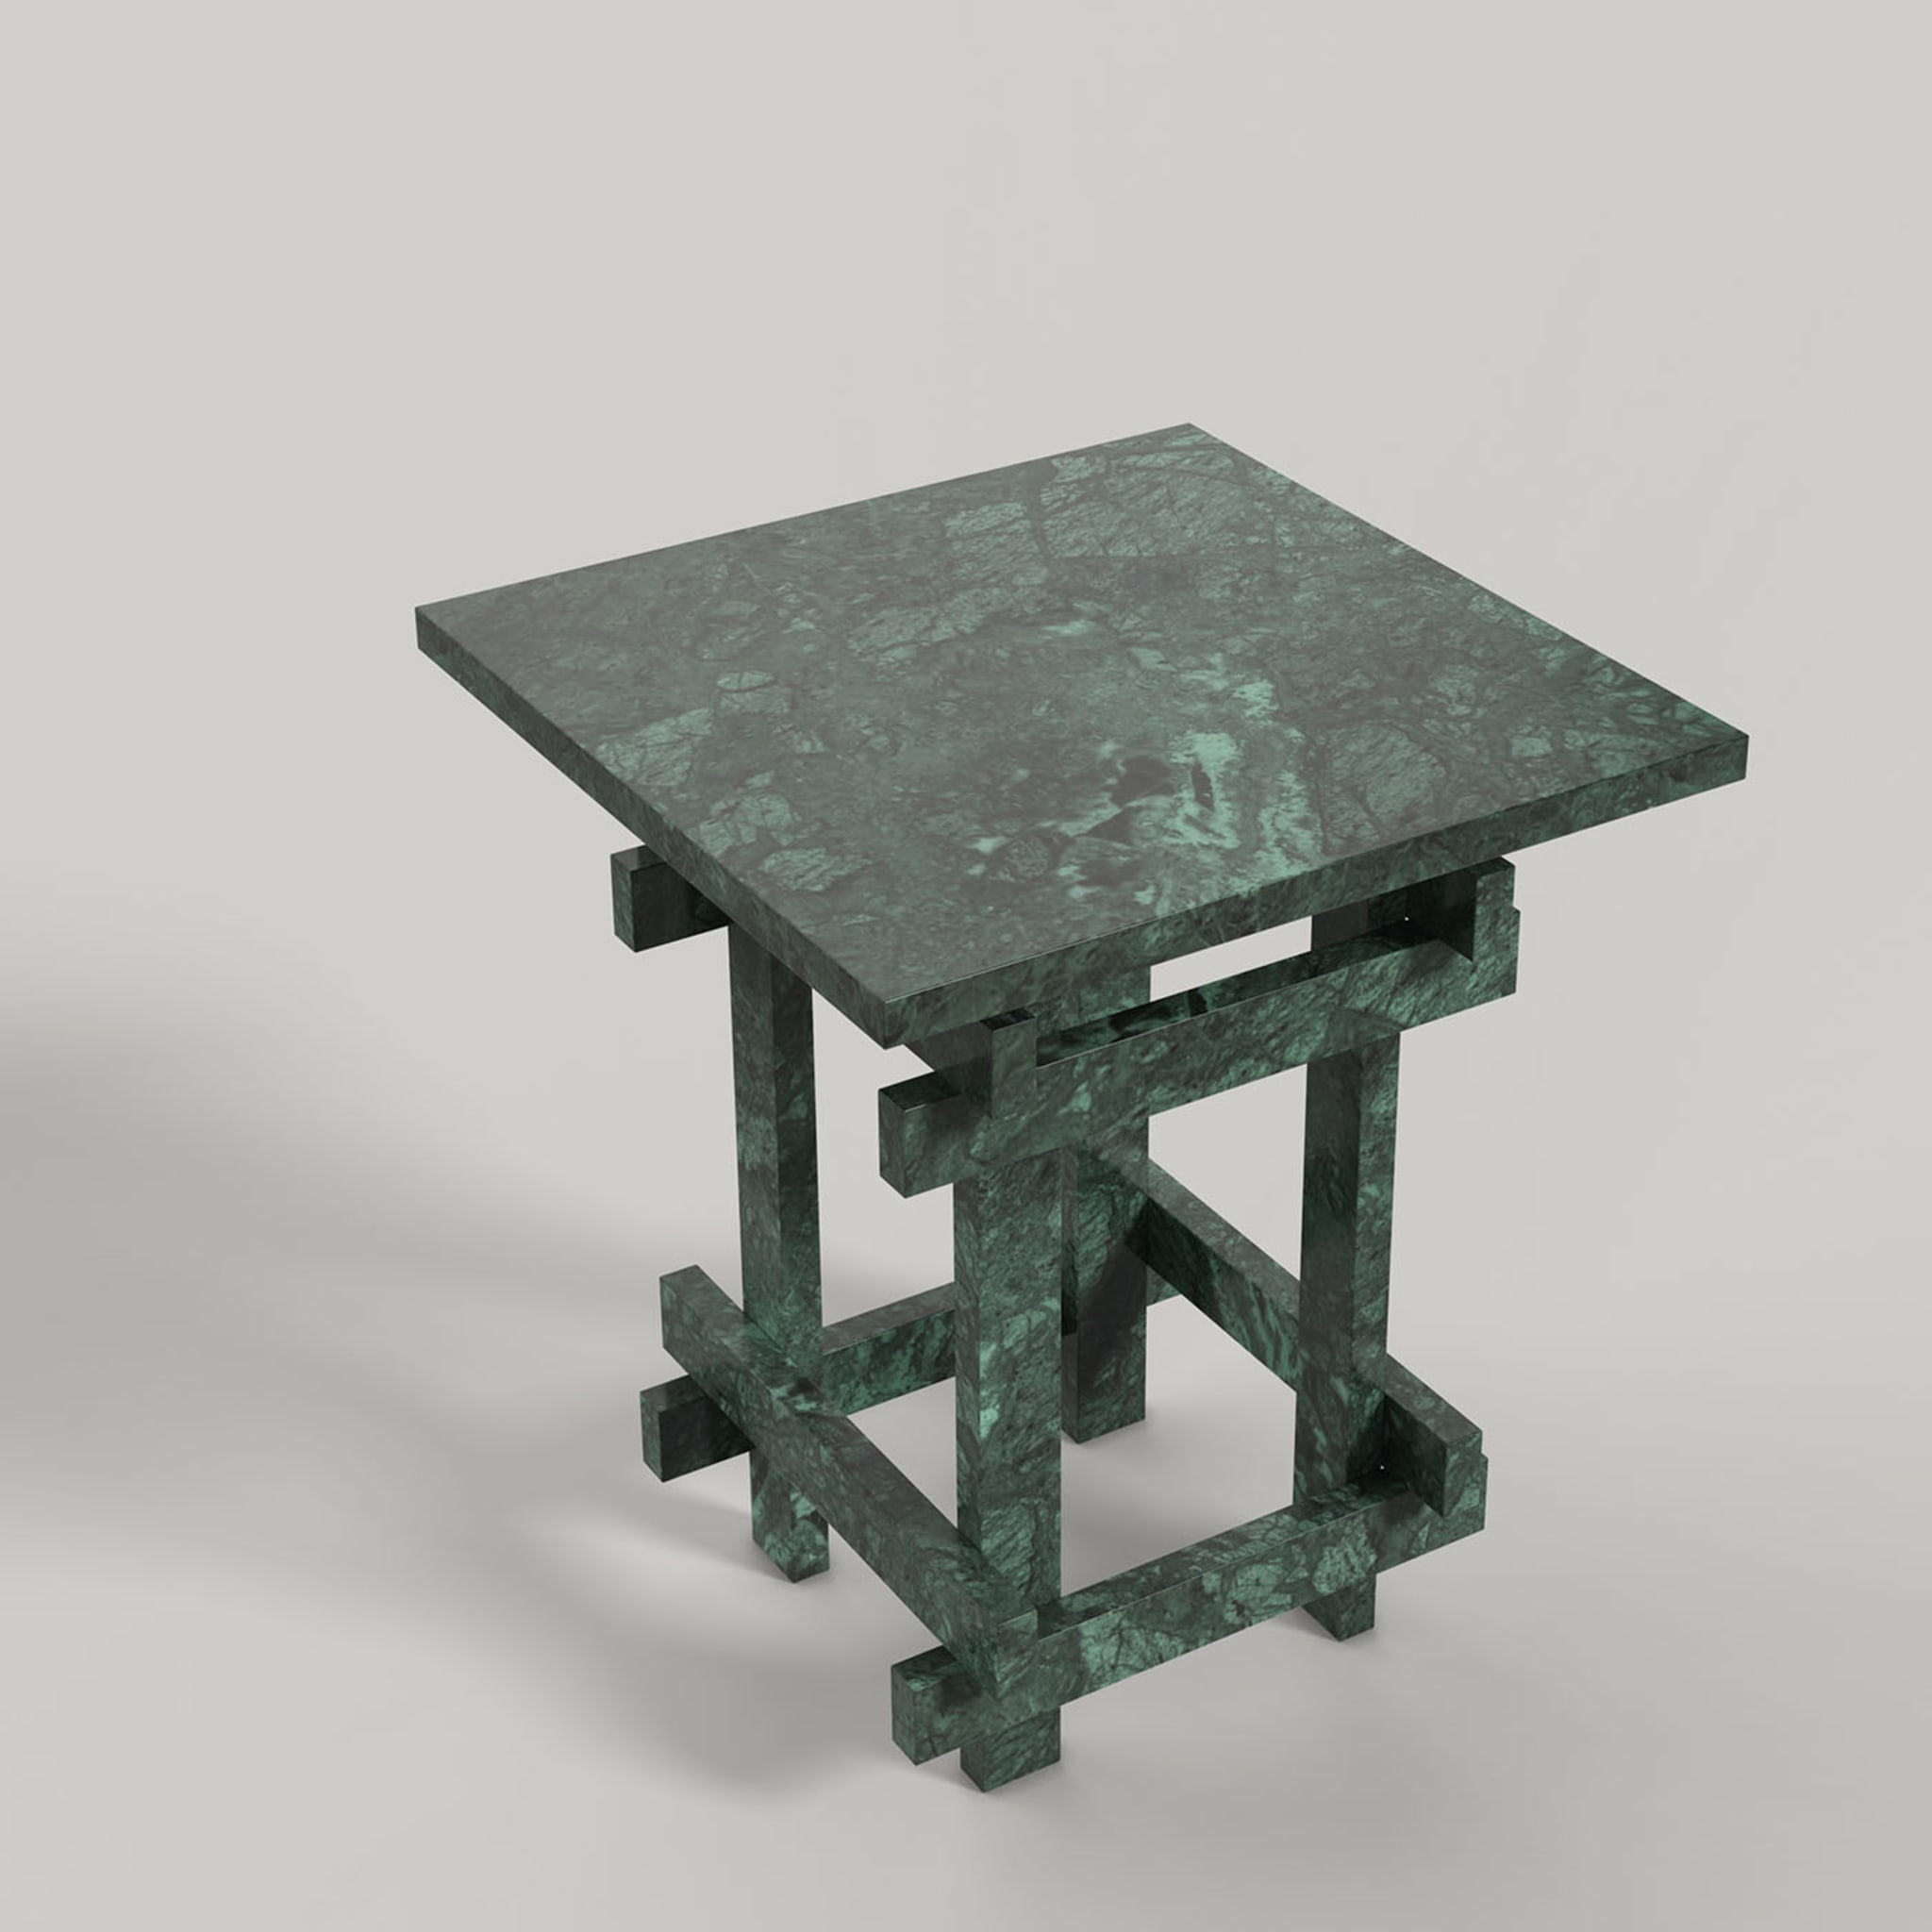 Paranoid V1 Side Table in Guatemala Marble #3 - Alternative view 3